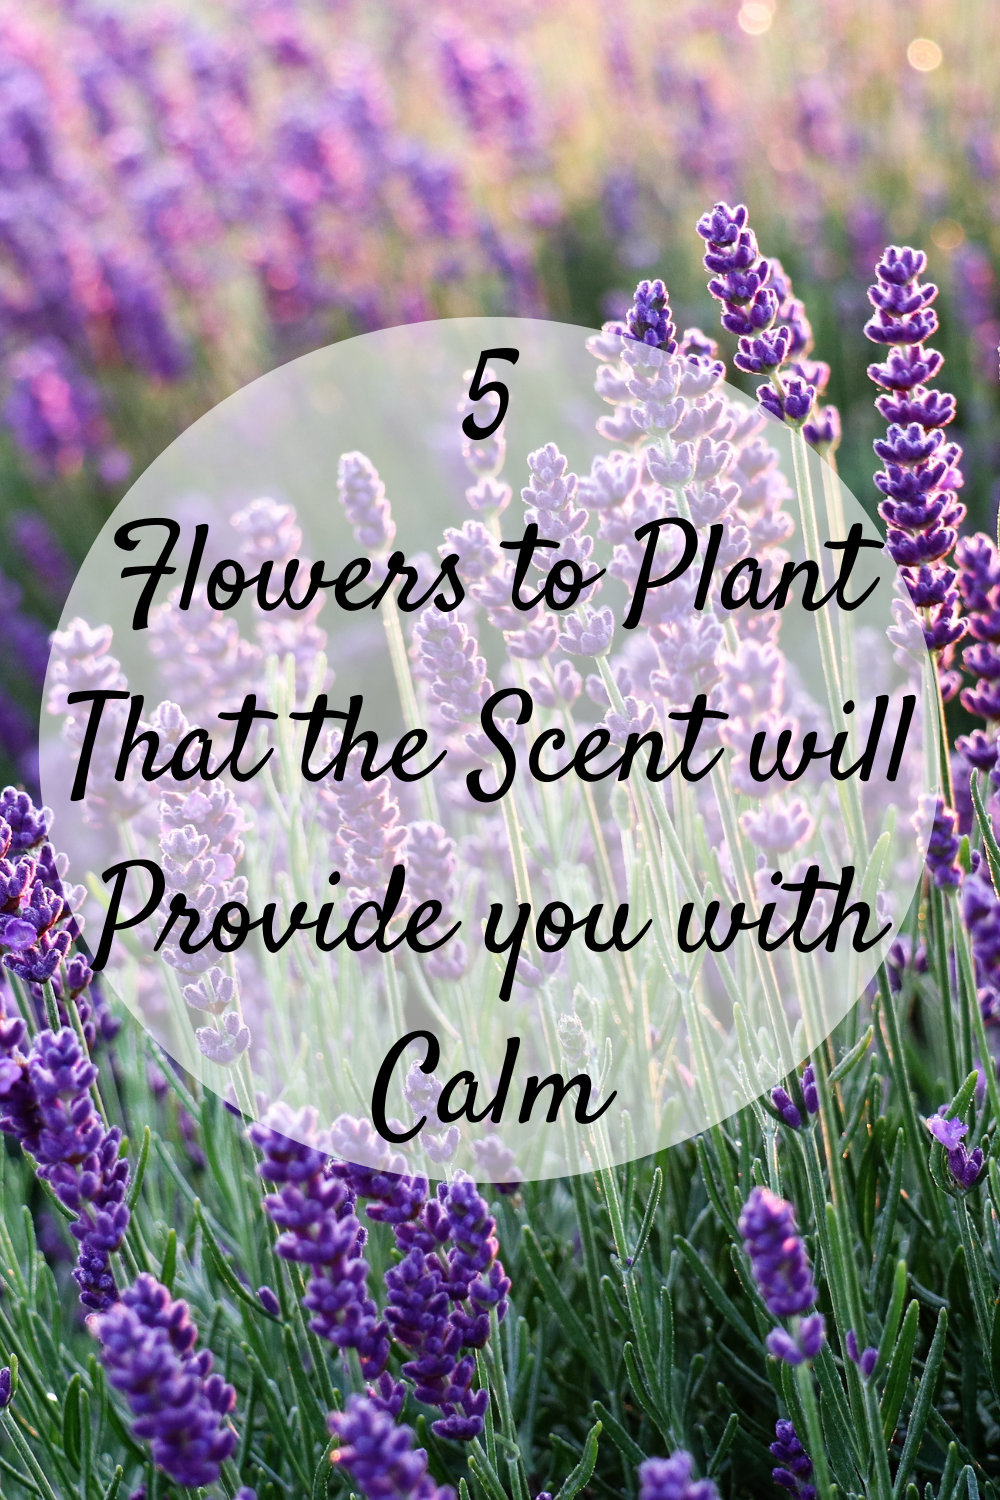 5 Flowers to Plant That the Scent will Provide you with Calm